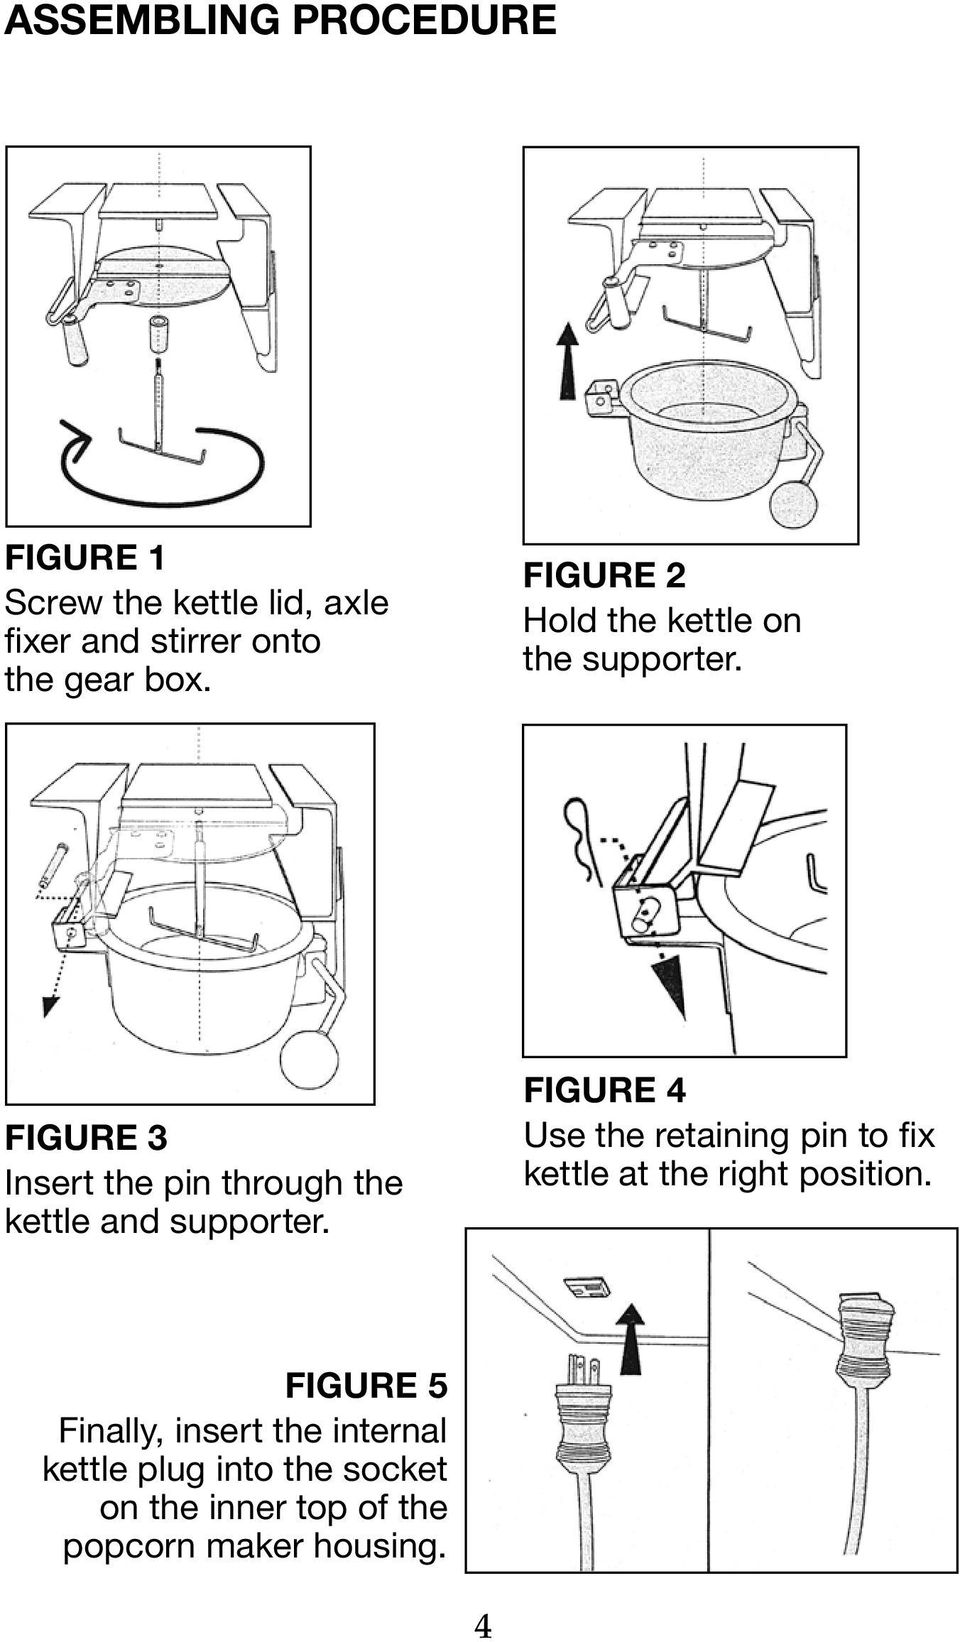 Figure 3 Insert the pin through the kettle and supporter.